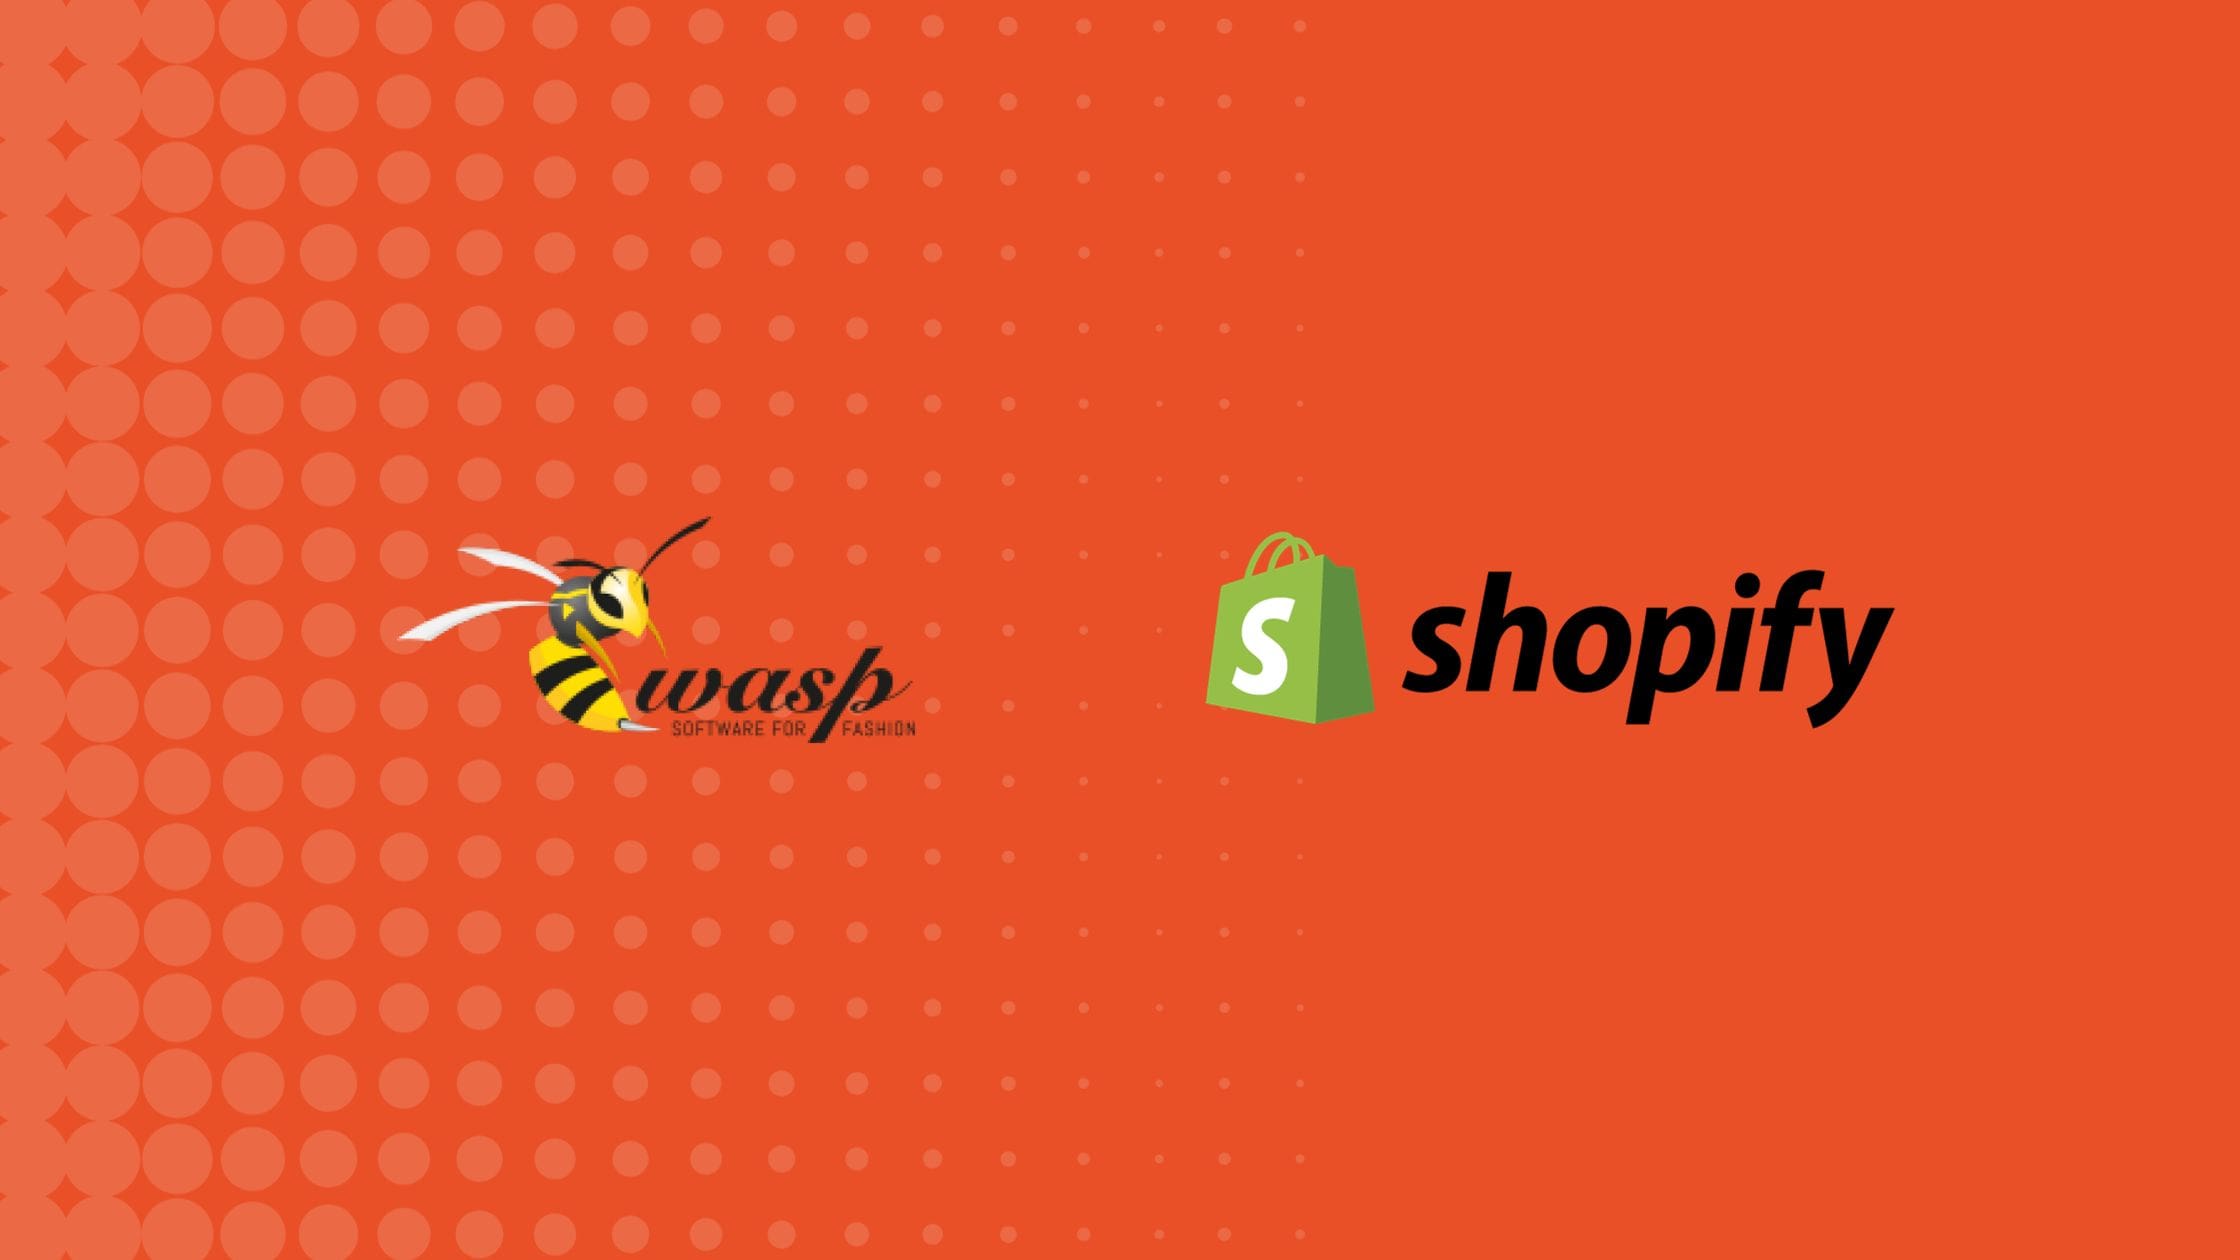 Wasp x Shopify